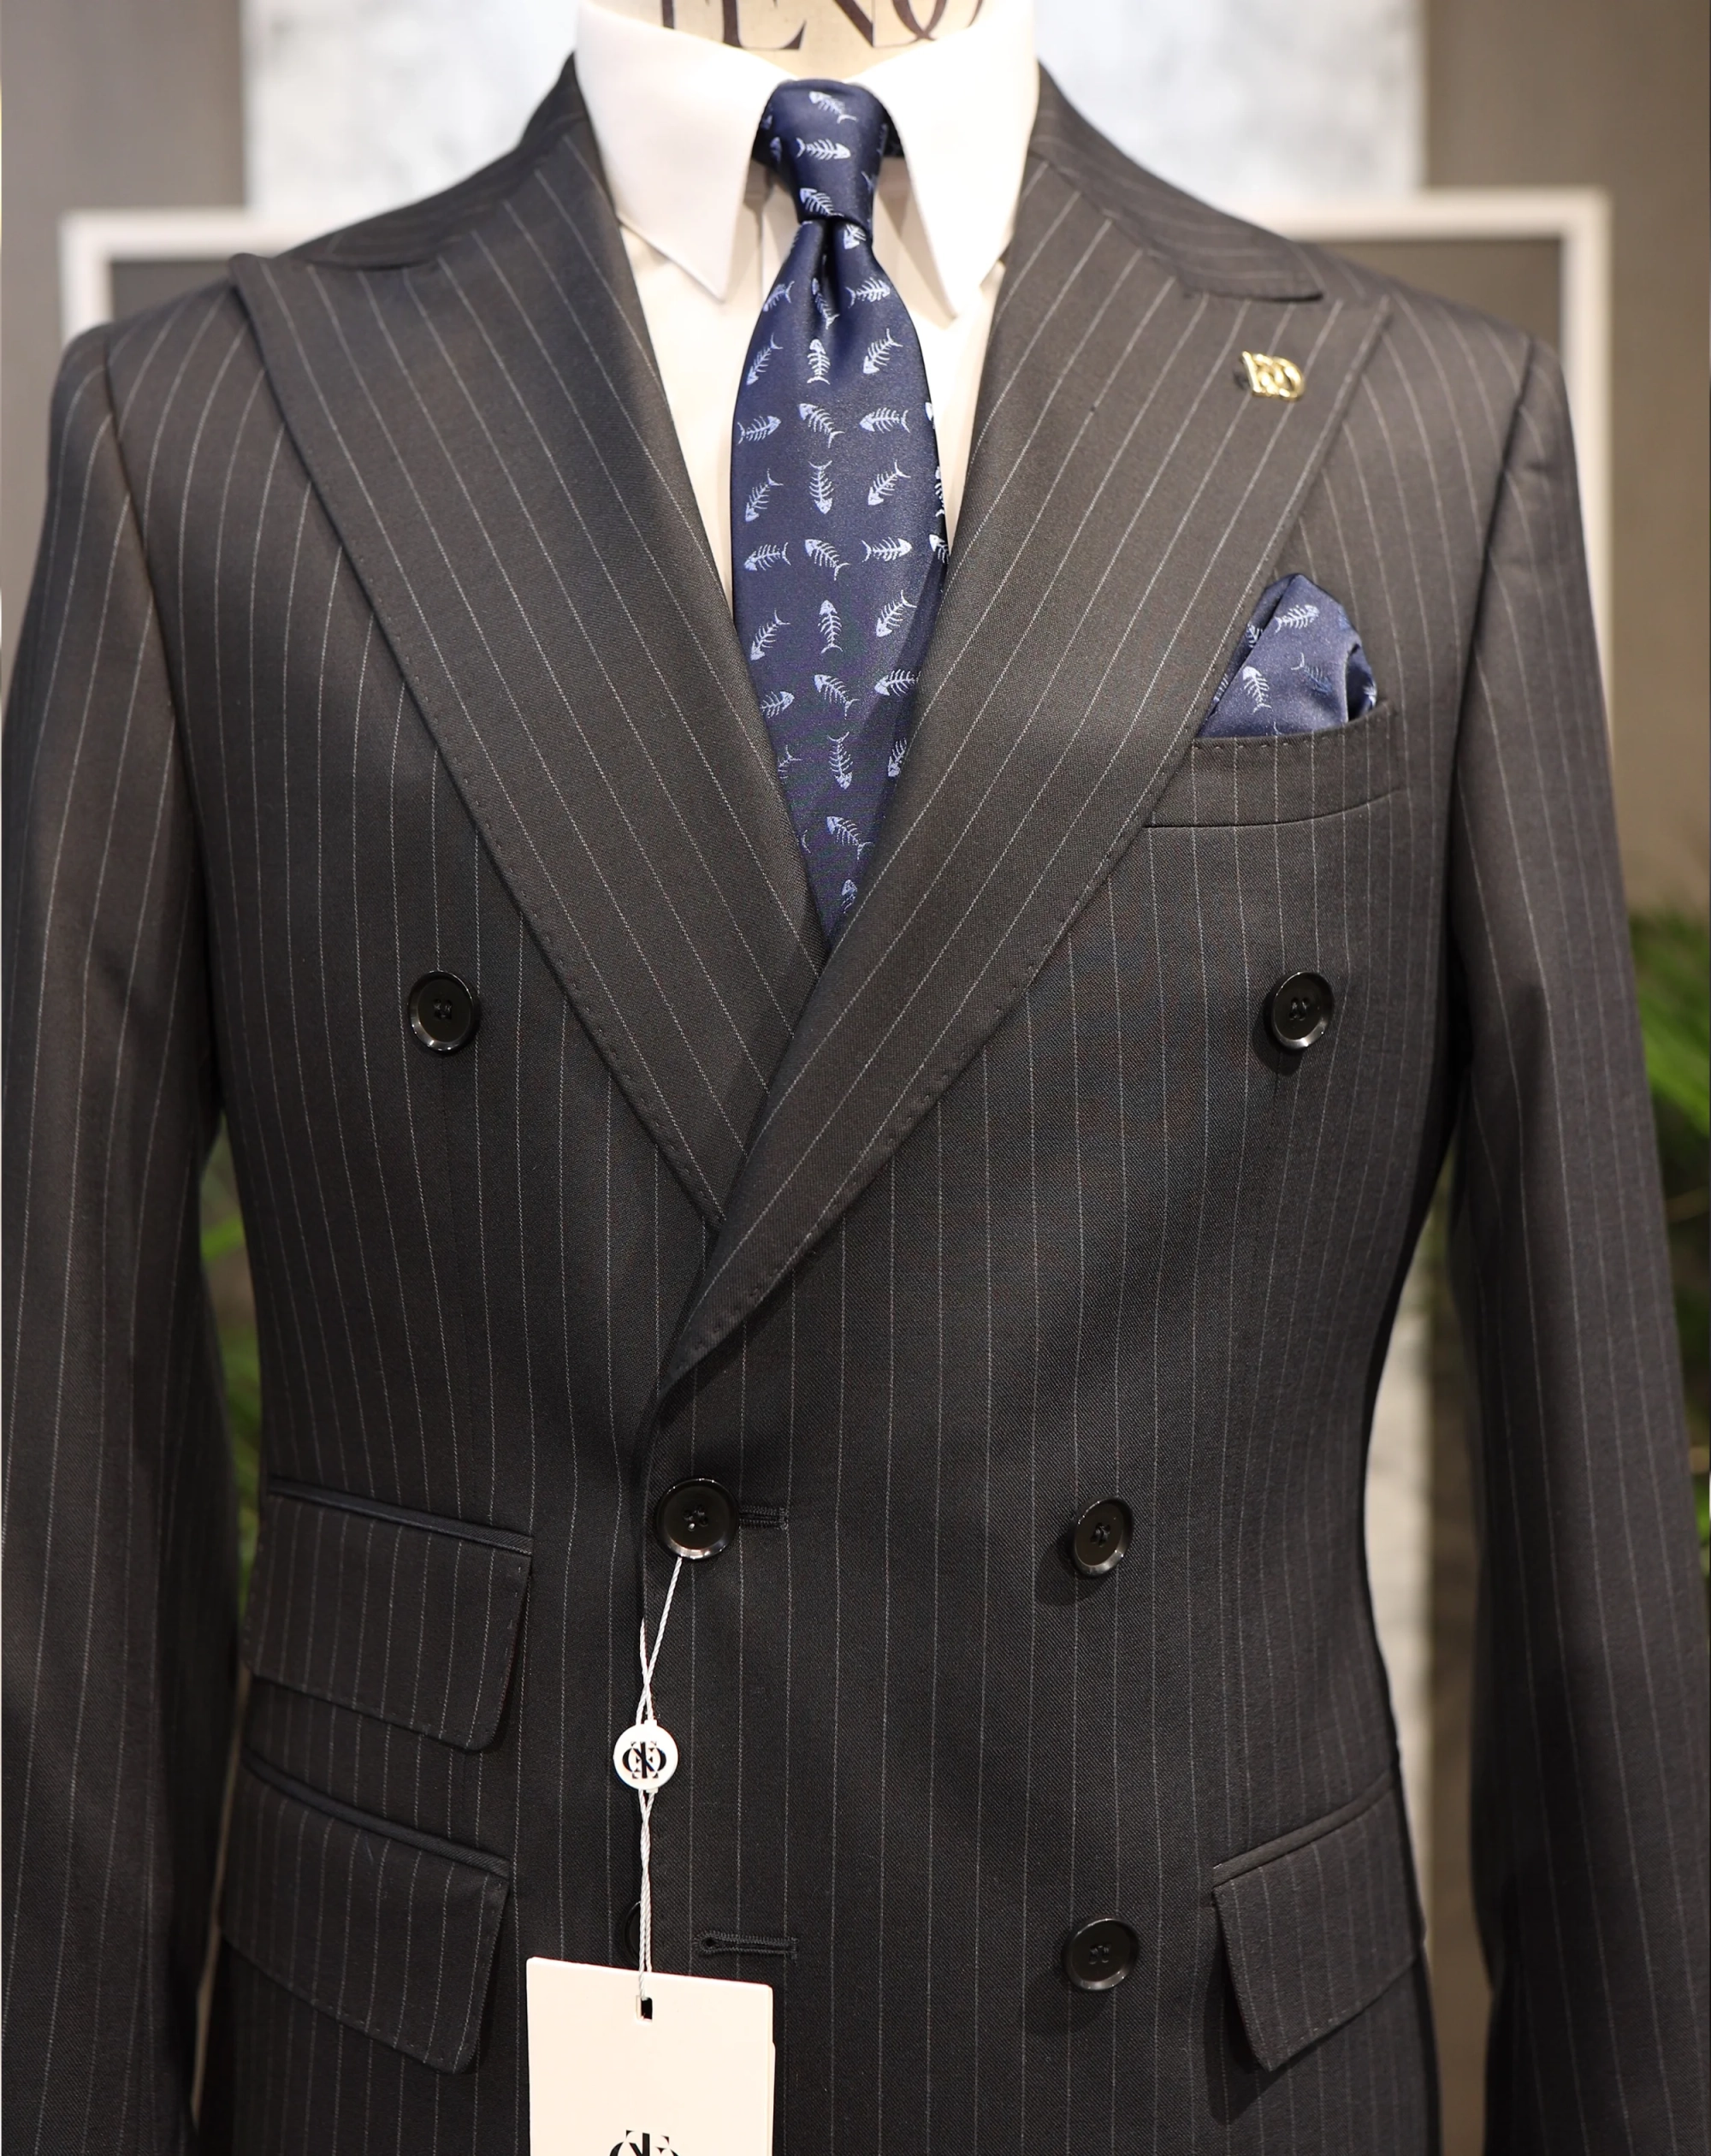 Berneuse gray double-breasted striped suit